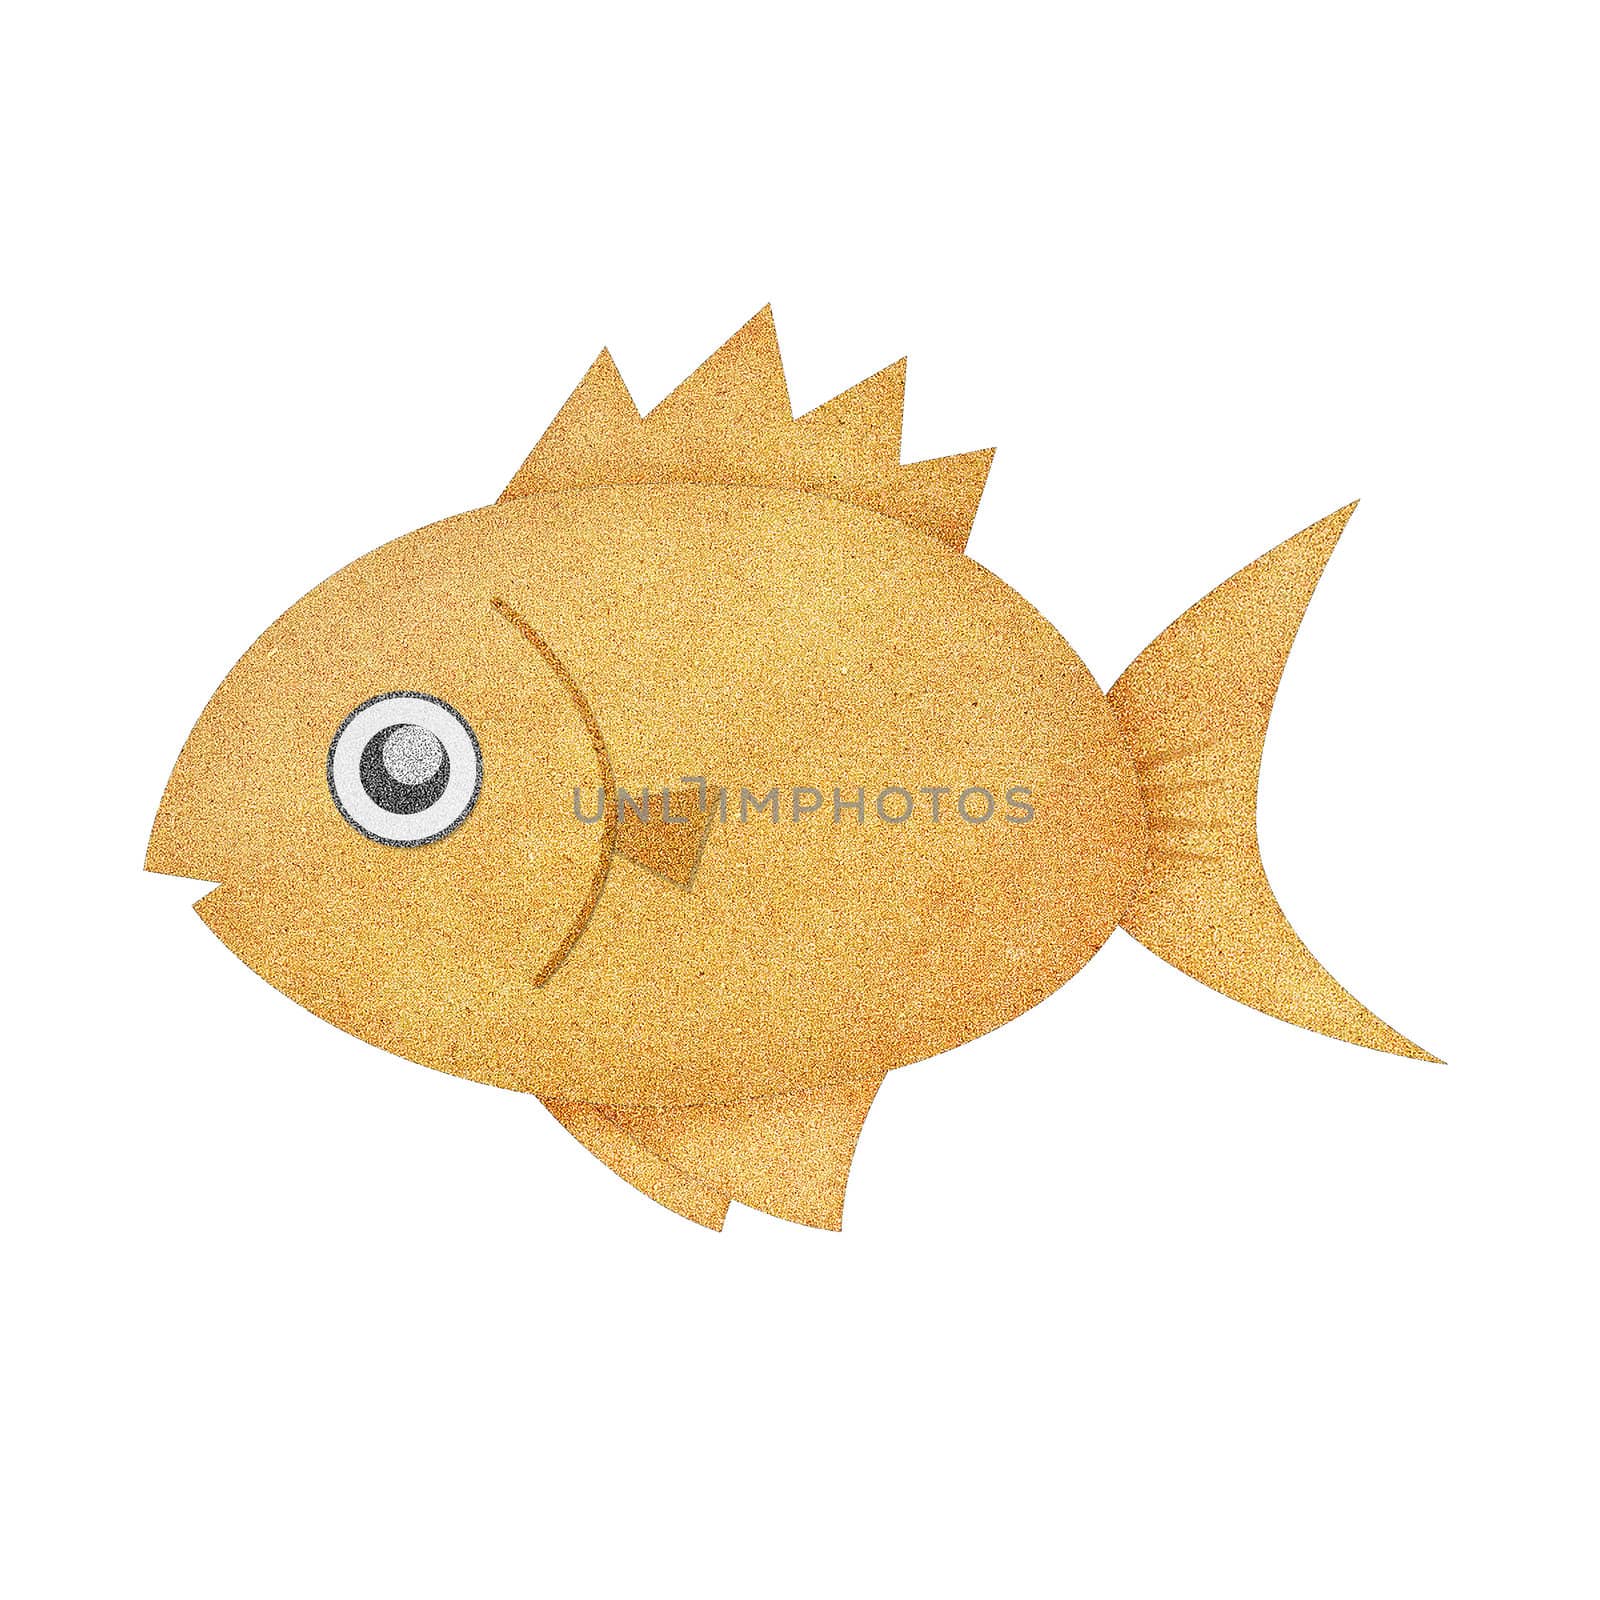 Recycled paper texture fish illustration isolated on white by jakgree